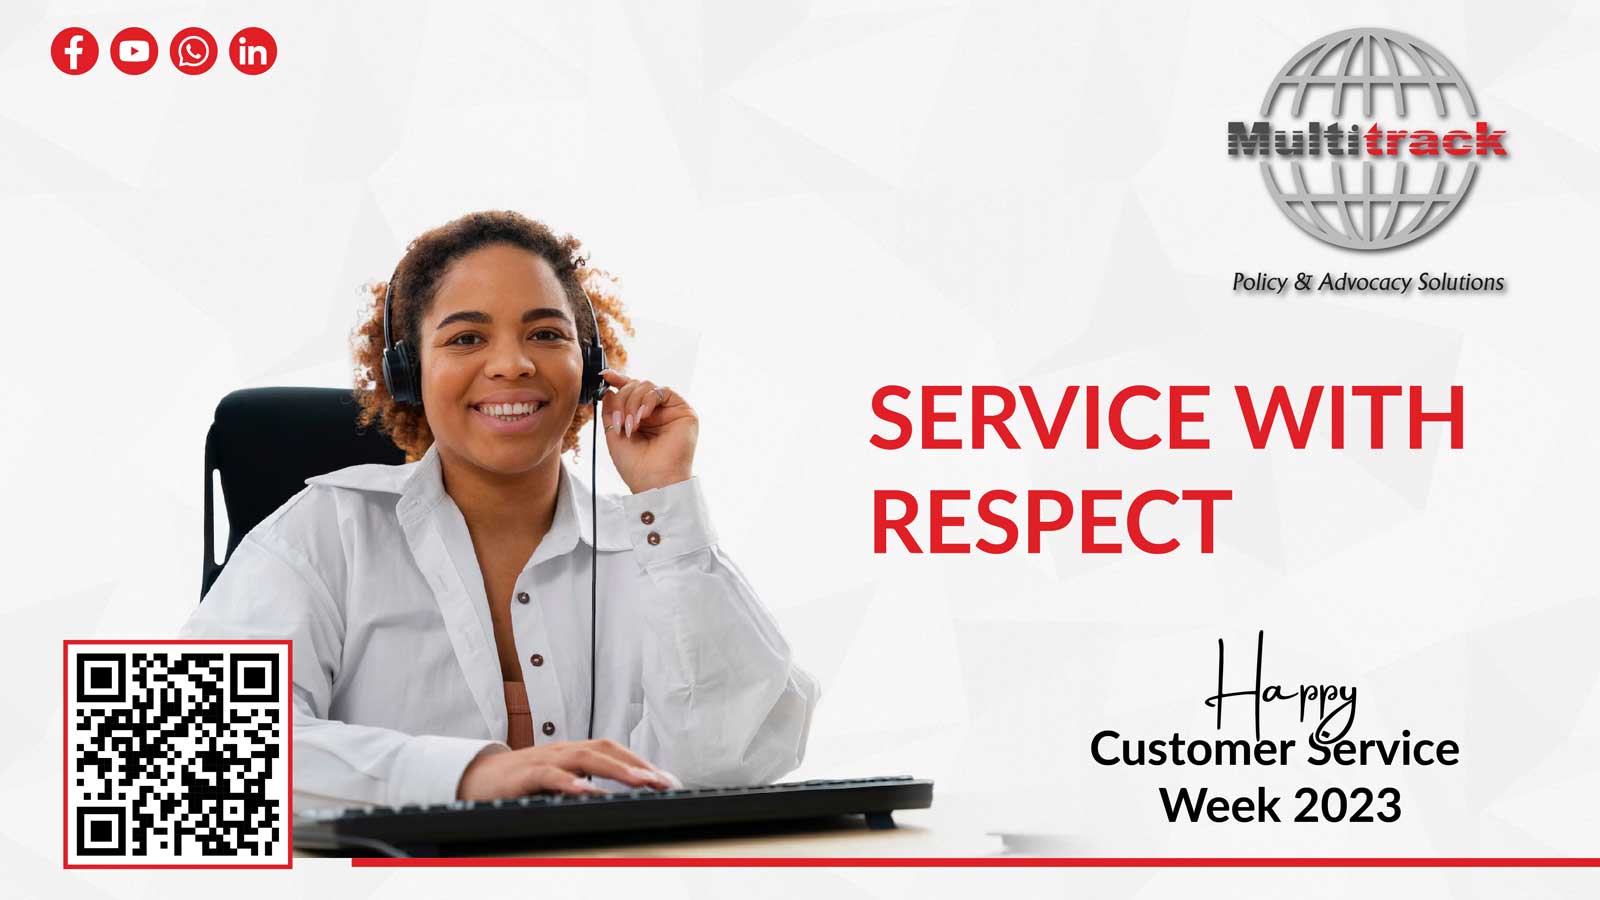 Join us in Celebrating Customer Service Week - 'Service with Respect'